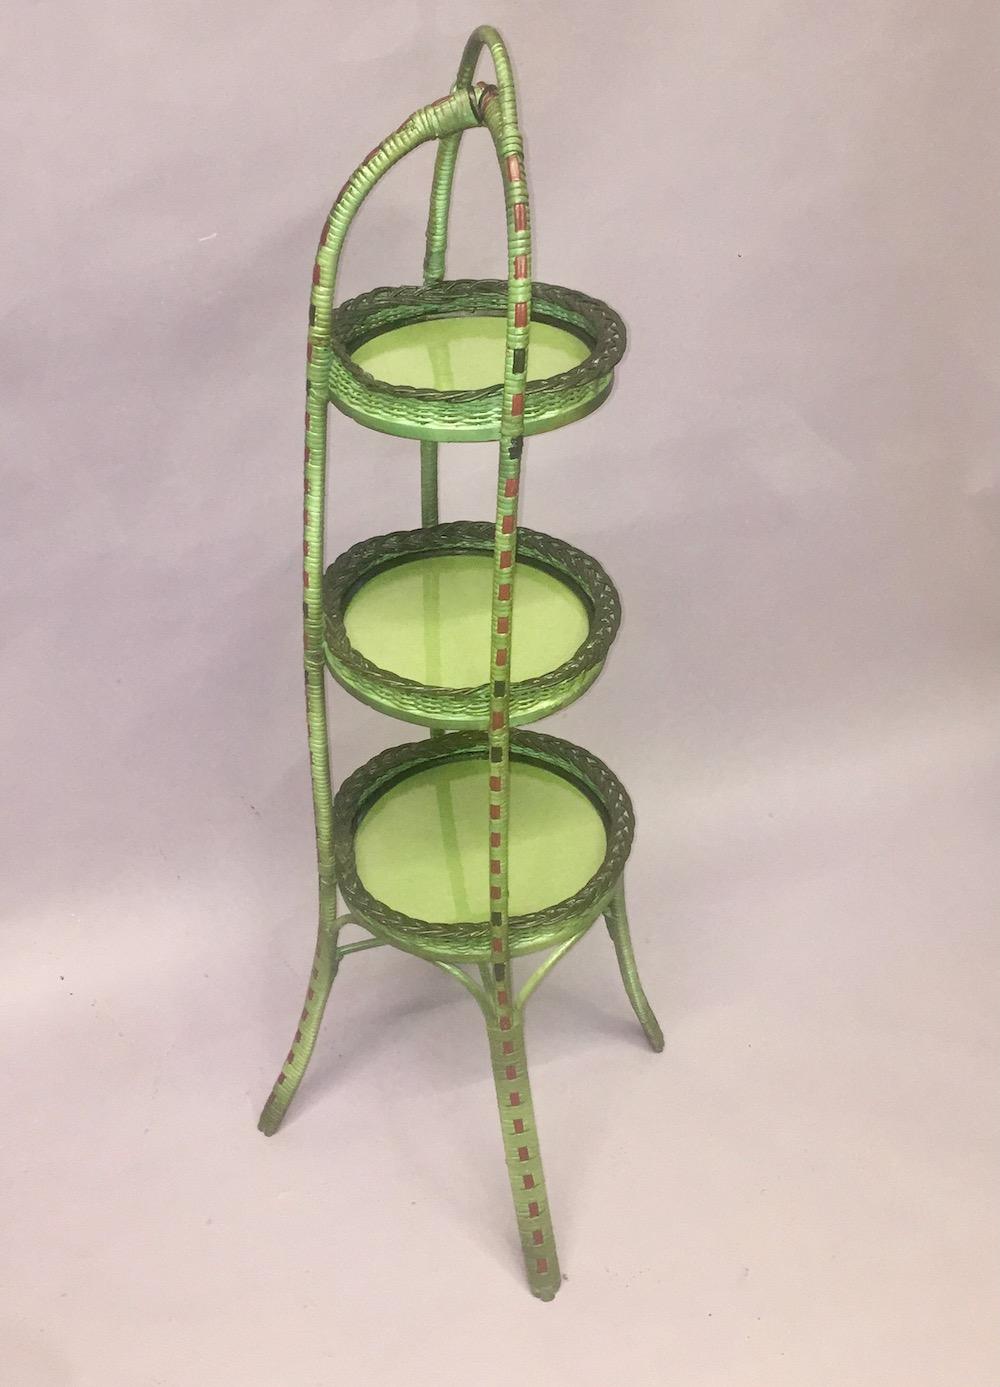 A lovely rare French green finished pie caddy / Hors-d'oeuvres server, American, attributed to Heywood Wakefield Company, Gardner Ma.C. 1910 This handled, three shelf server is done in a lovely unusual green shade with black and red decorated woven